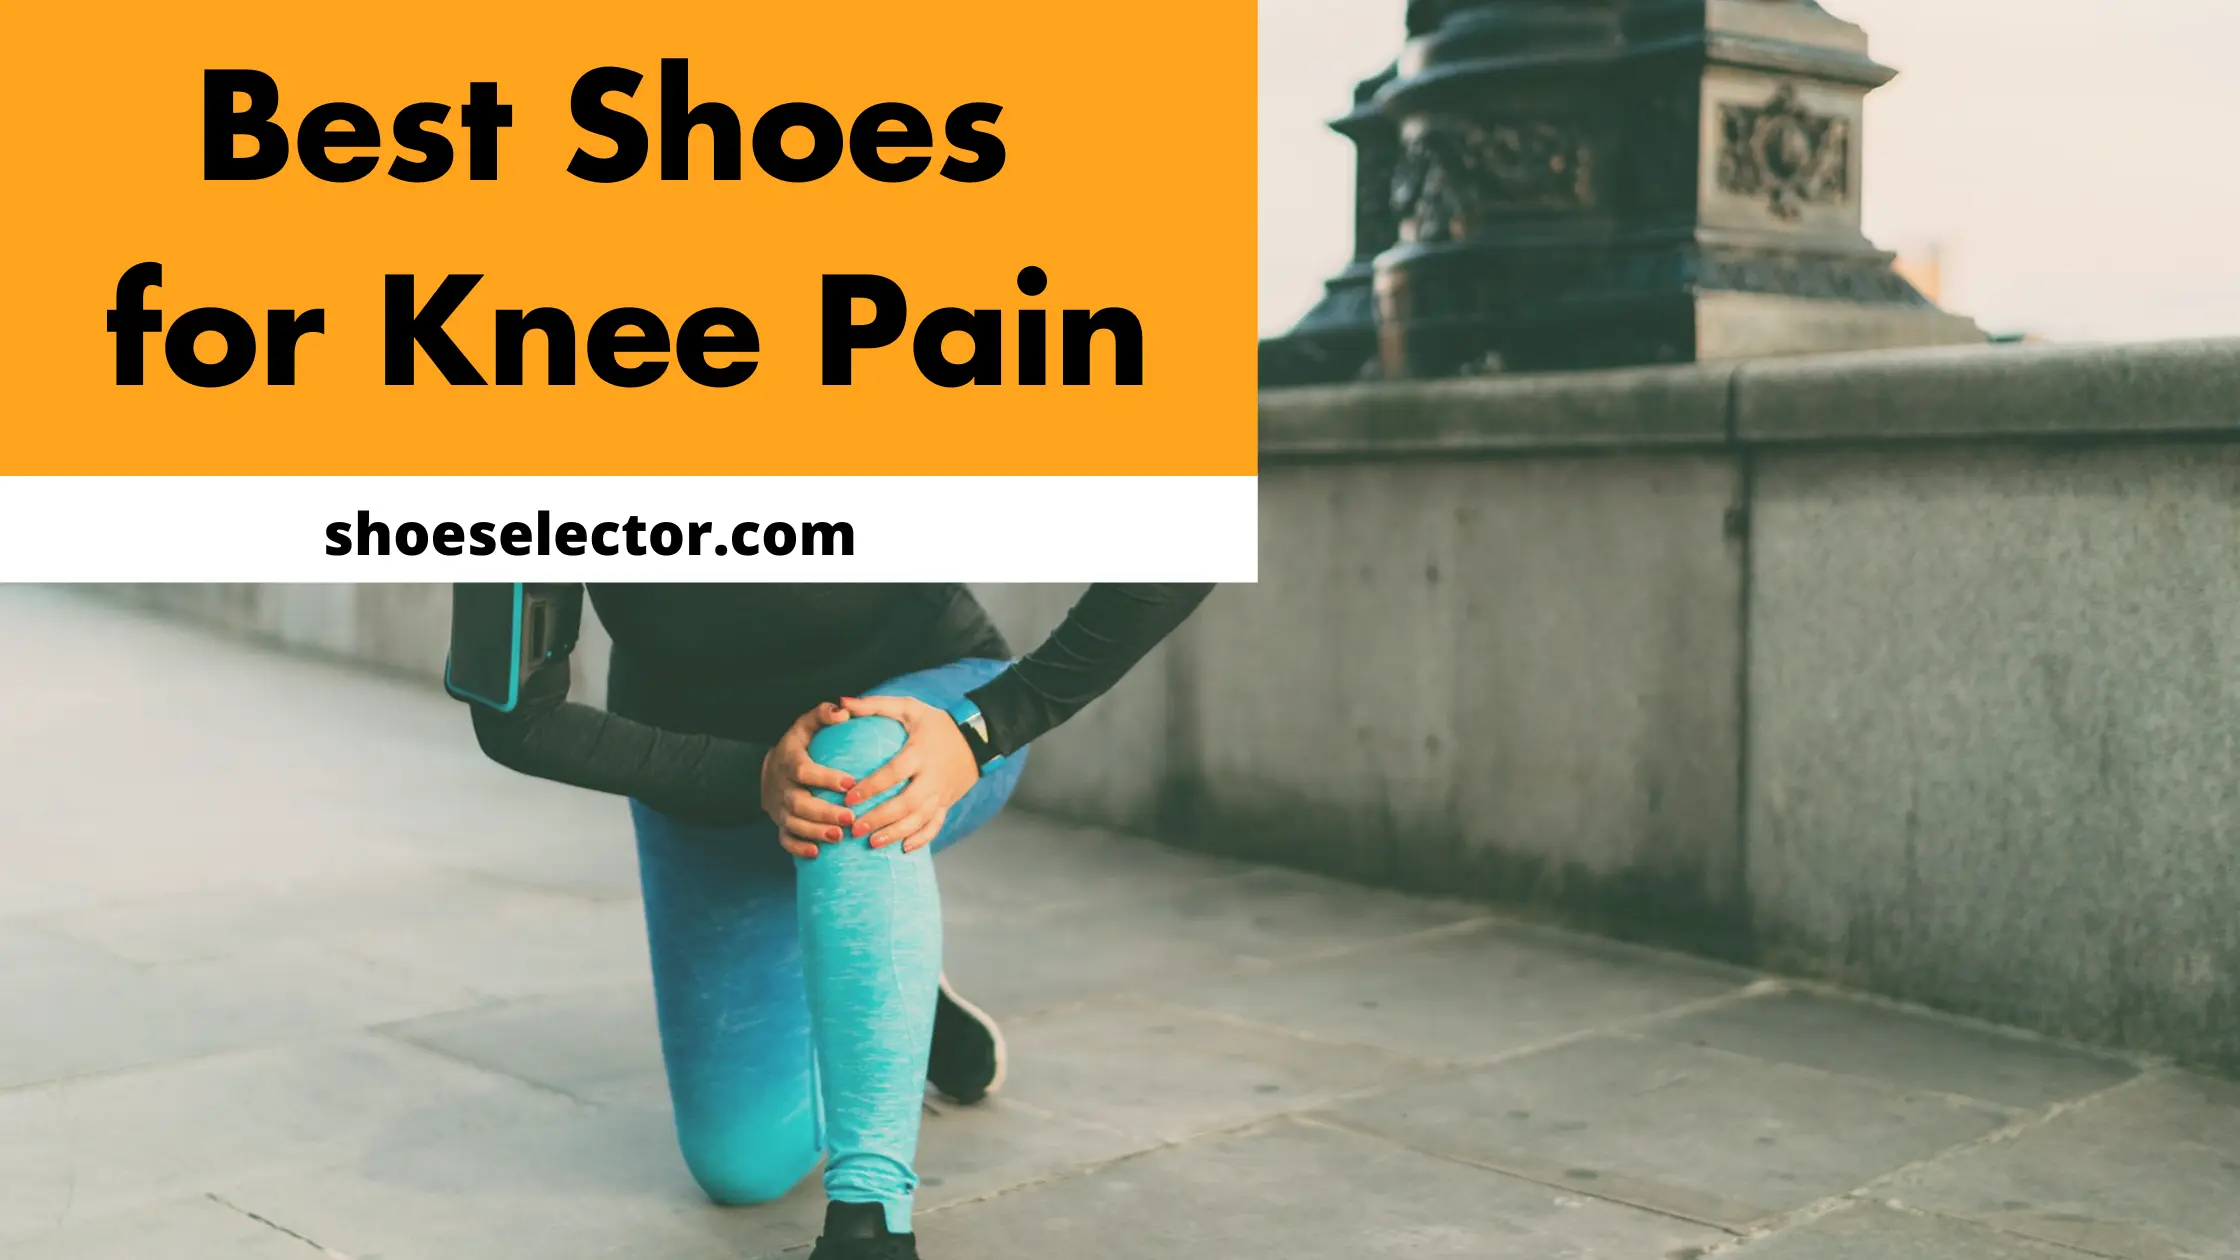 Best Shoes For Knee Pain - Recommended Guide